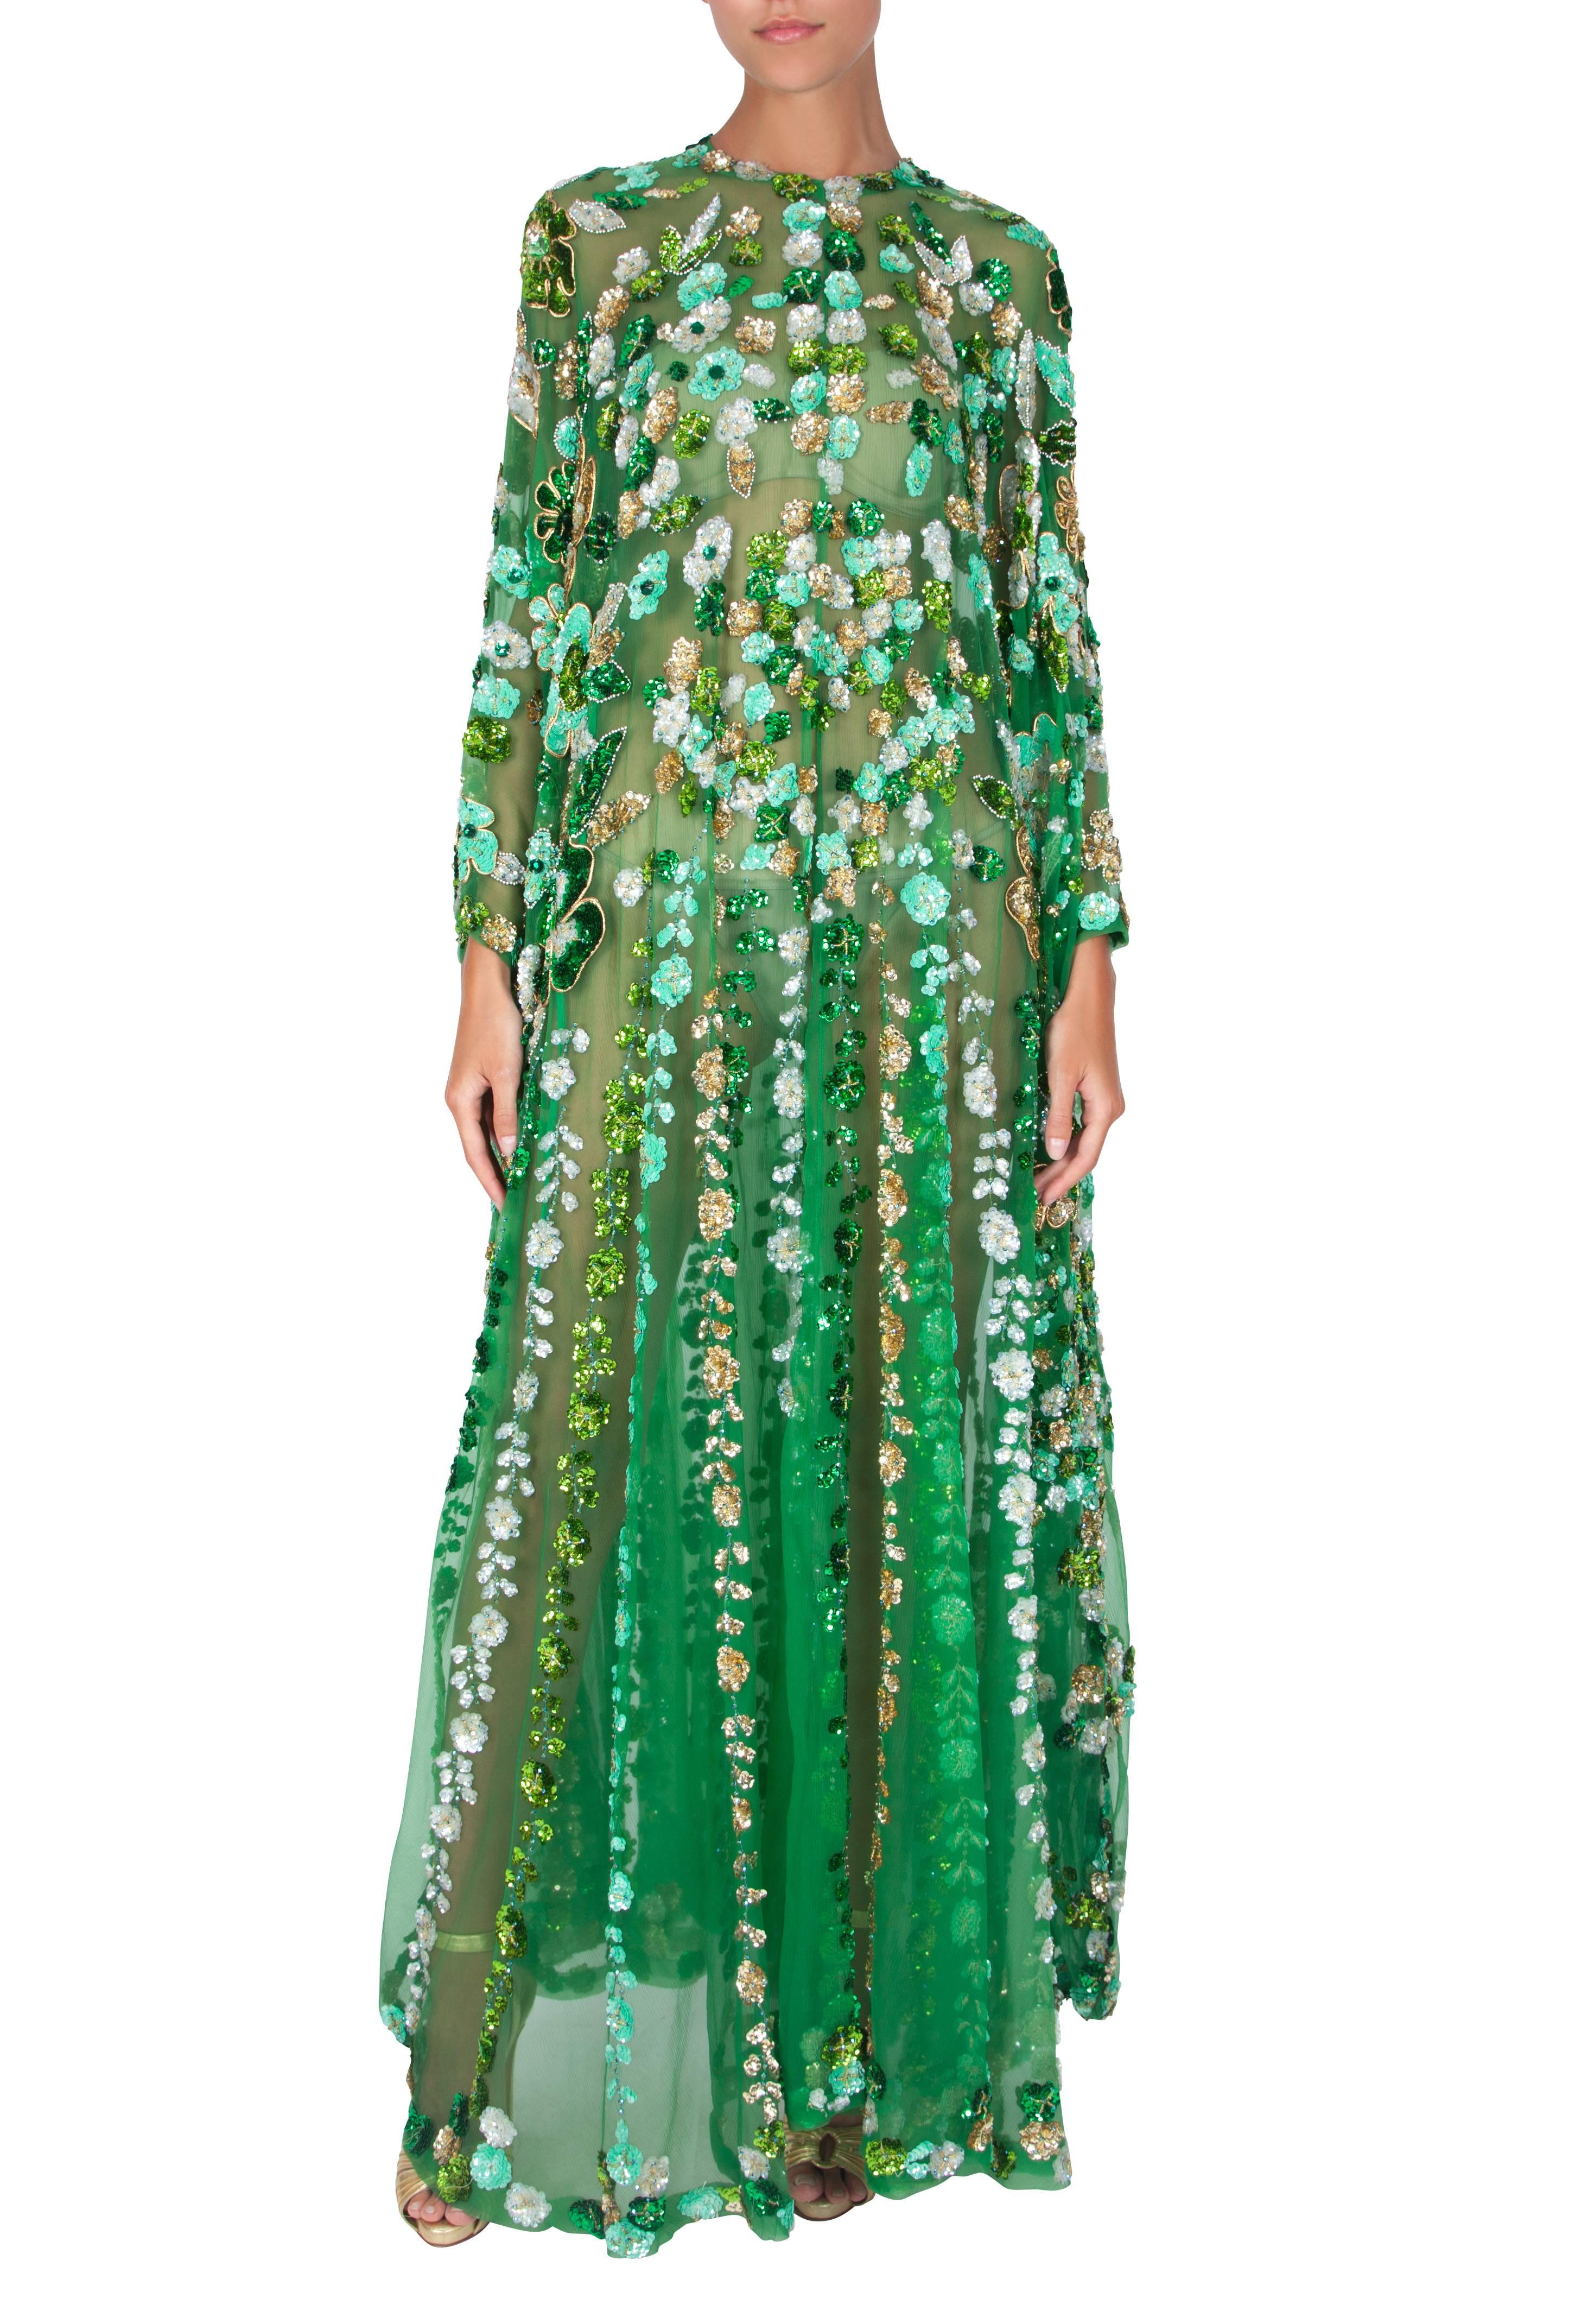 A striking emerald green silk chiffon caftan with gold and green floral sequin embroidery all over from London boutique Arabesque. This heavy, full-length caftan slips on over the head and features a shallow V-neck. The translucent emerald green